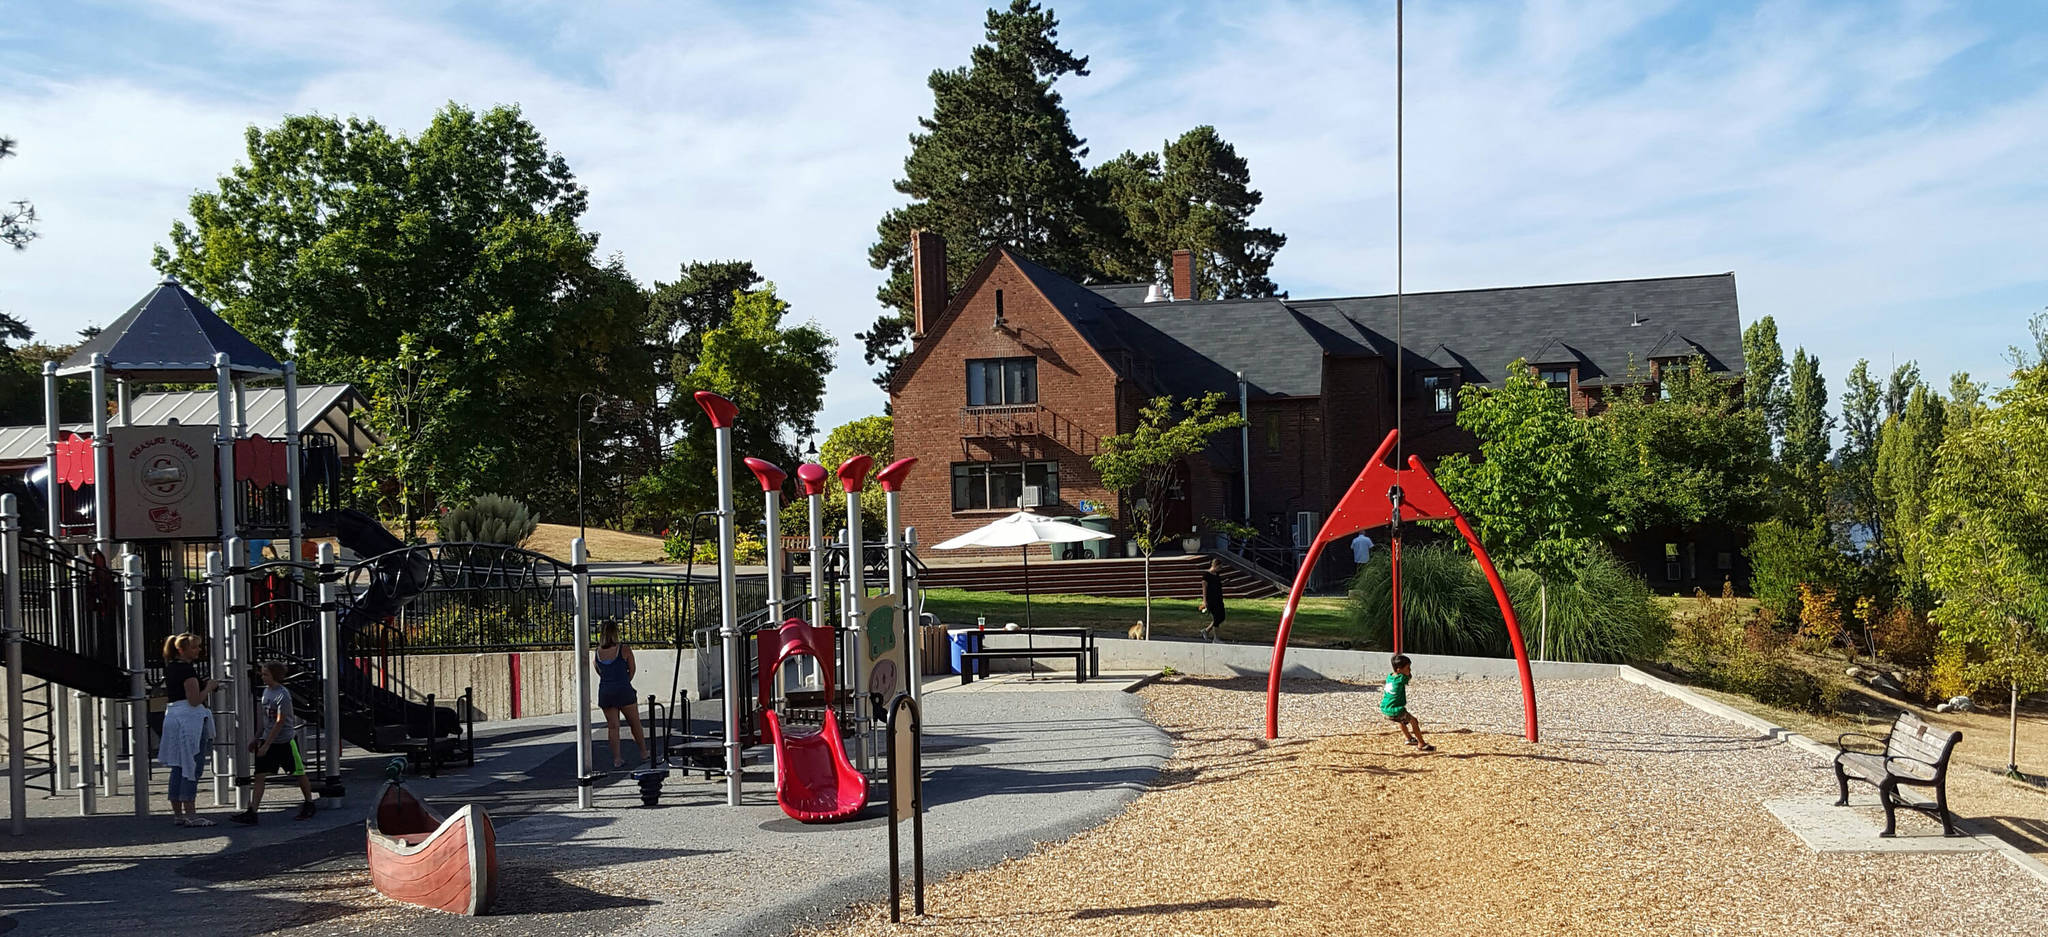 Kids enjoy their playground time at Luther Burbank Park. Courtesy of the city of Mercer island